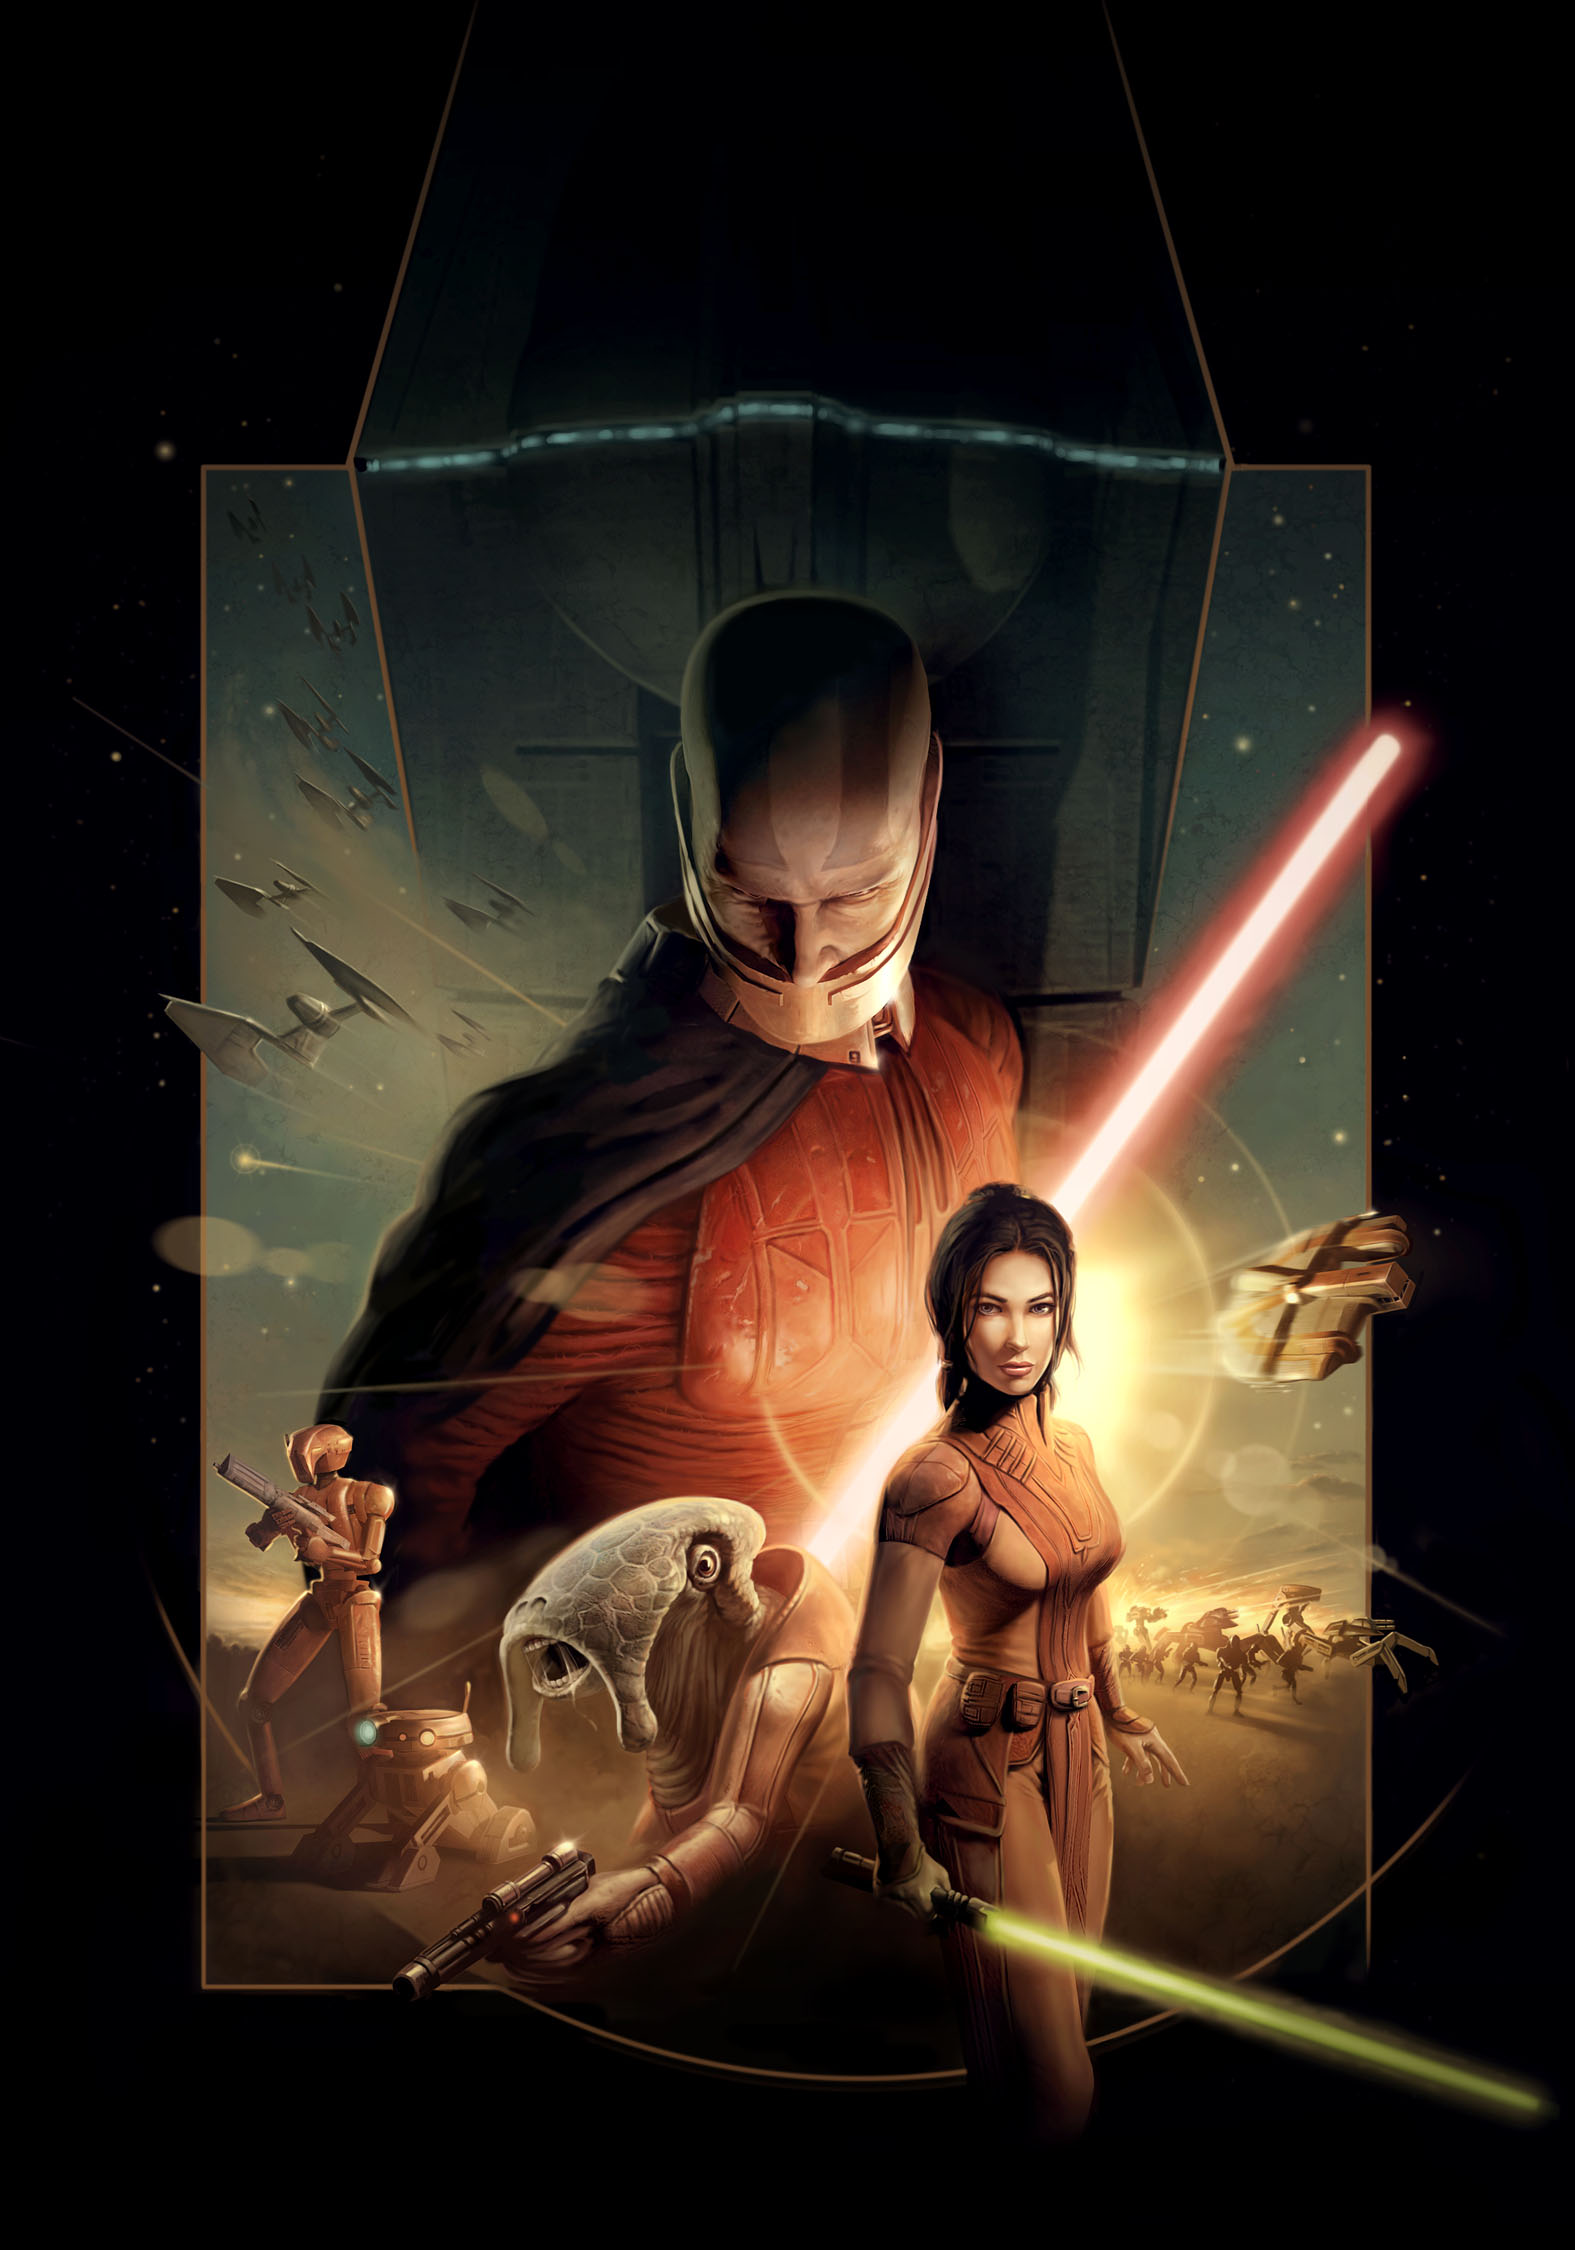 Star wars knights of the old republic русификатор для steam фото 5